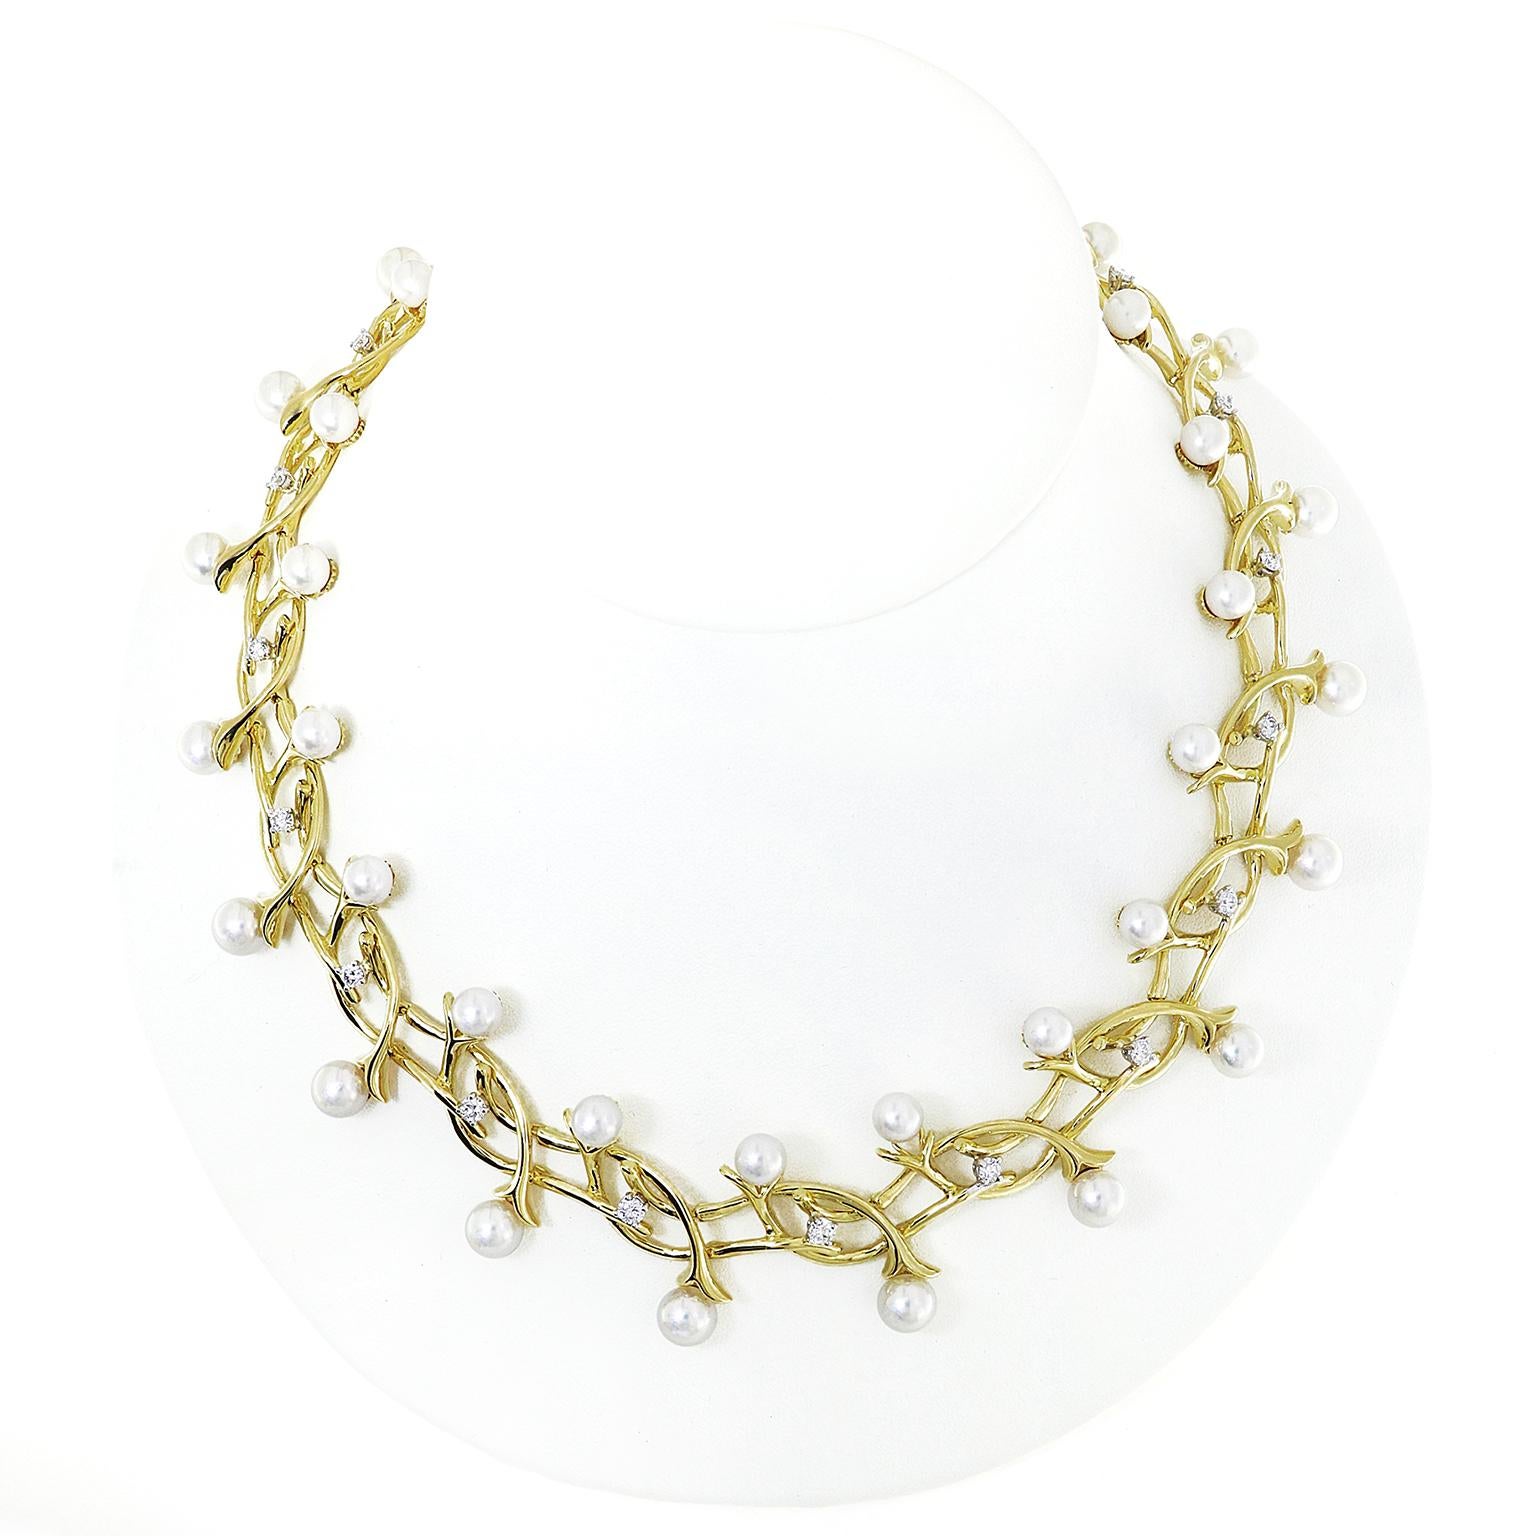 This Fountain of Dazzle necklace has a body of 18k yellow gold vines that lace throughout each other. Their tips are parted, resembling a flower sepal, which are individually adorned with pearls. Dispersed in the design are round brilliant cut